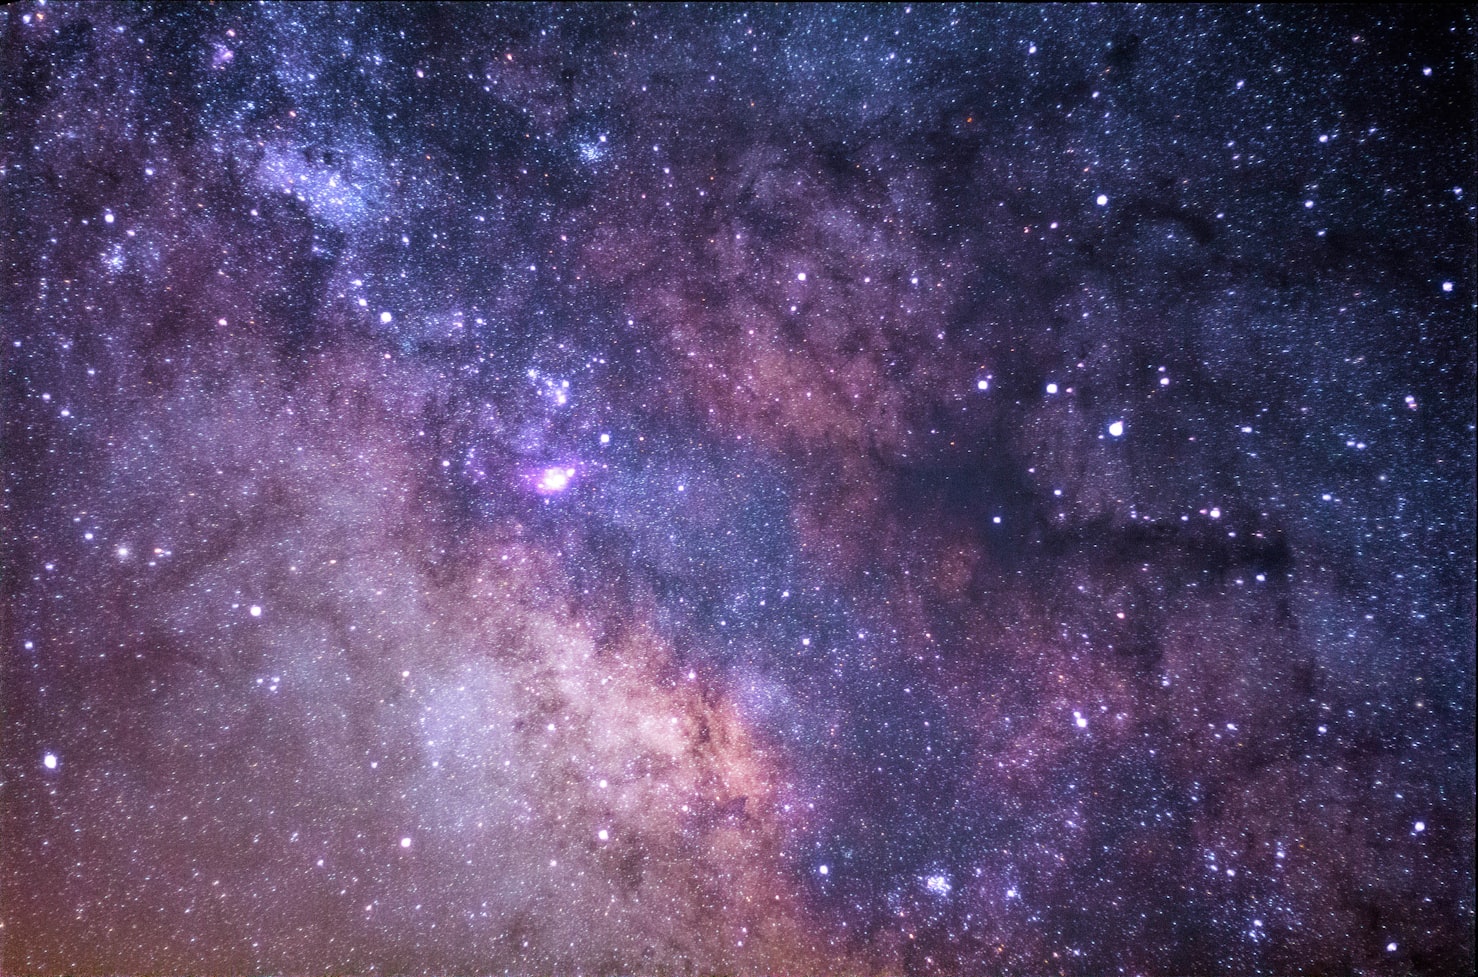 A starfield with various shades of purple